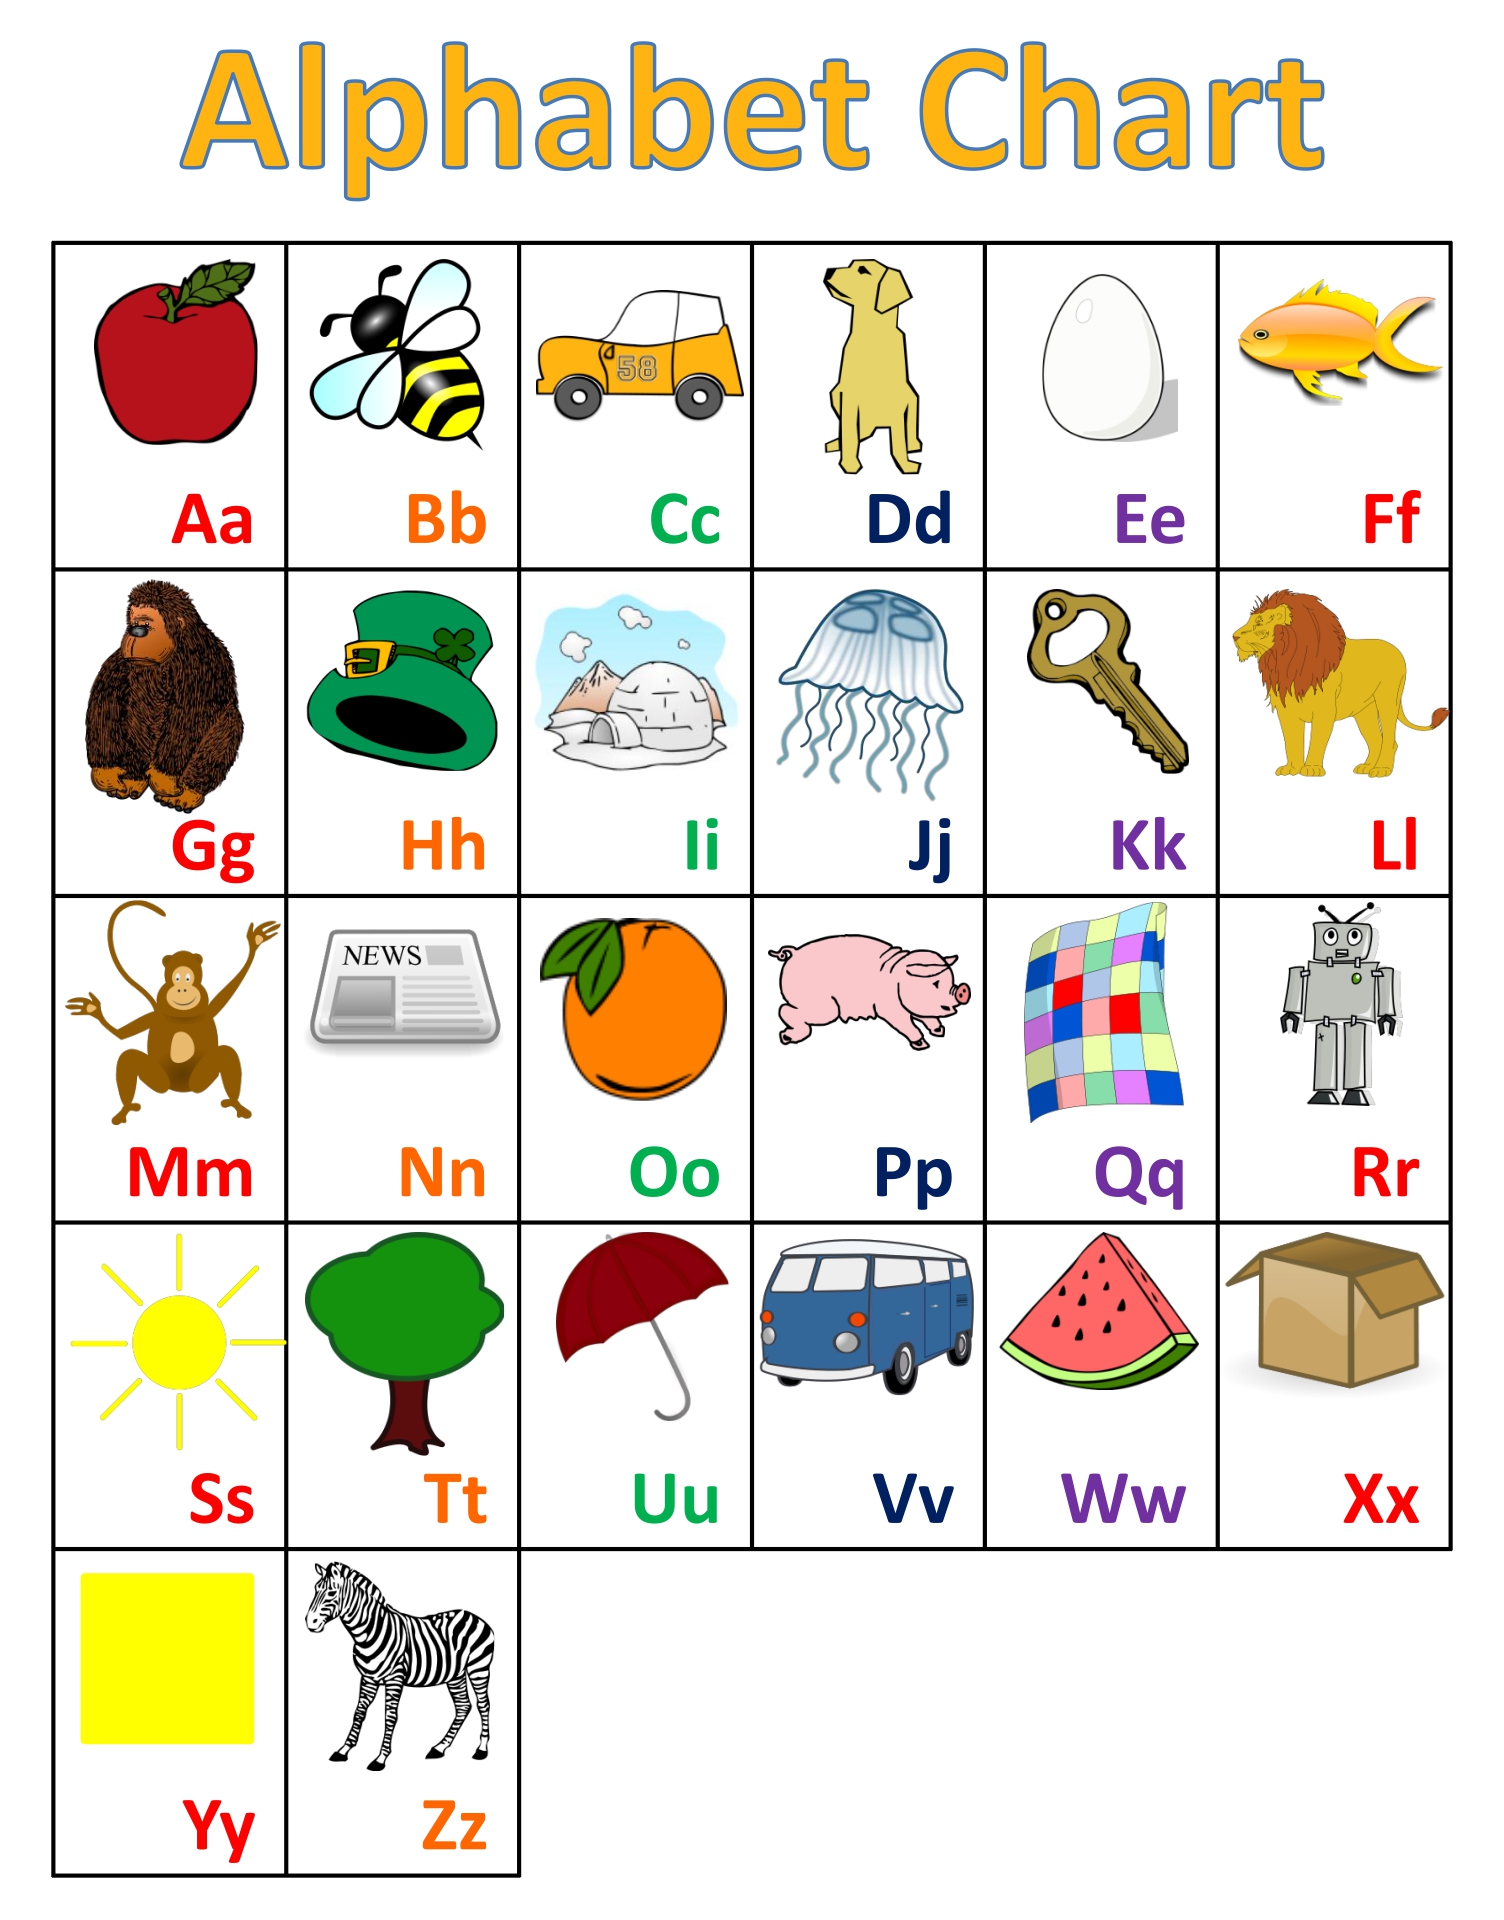 4-best-images-of-chart-full-page-alphabet-abc-printable-preschool